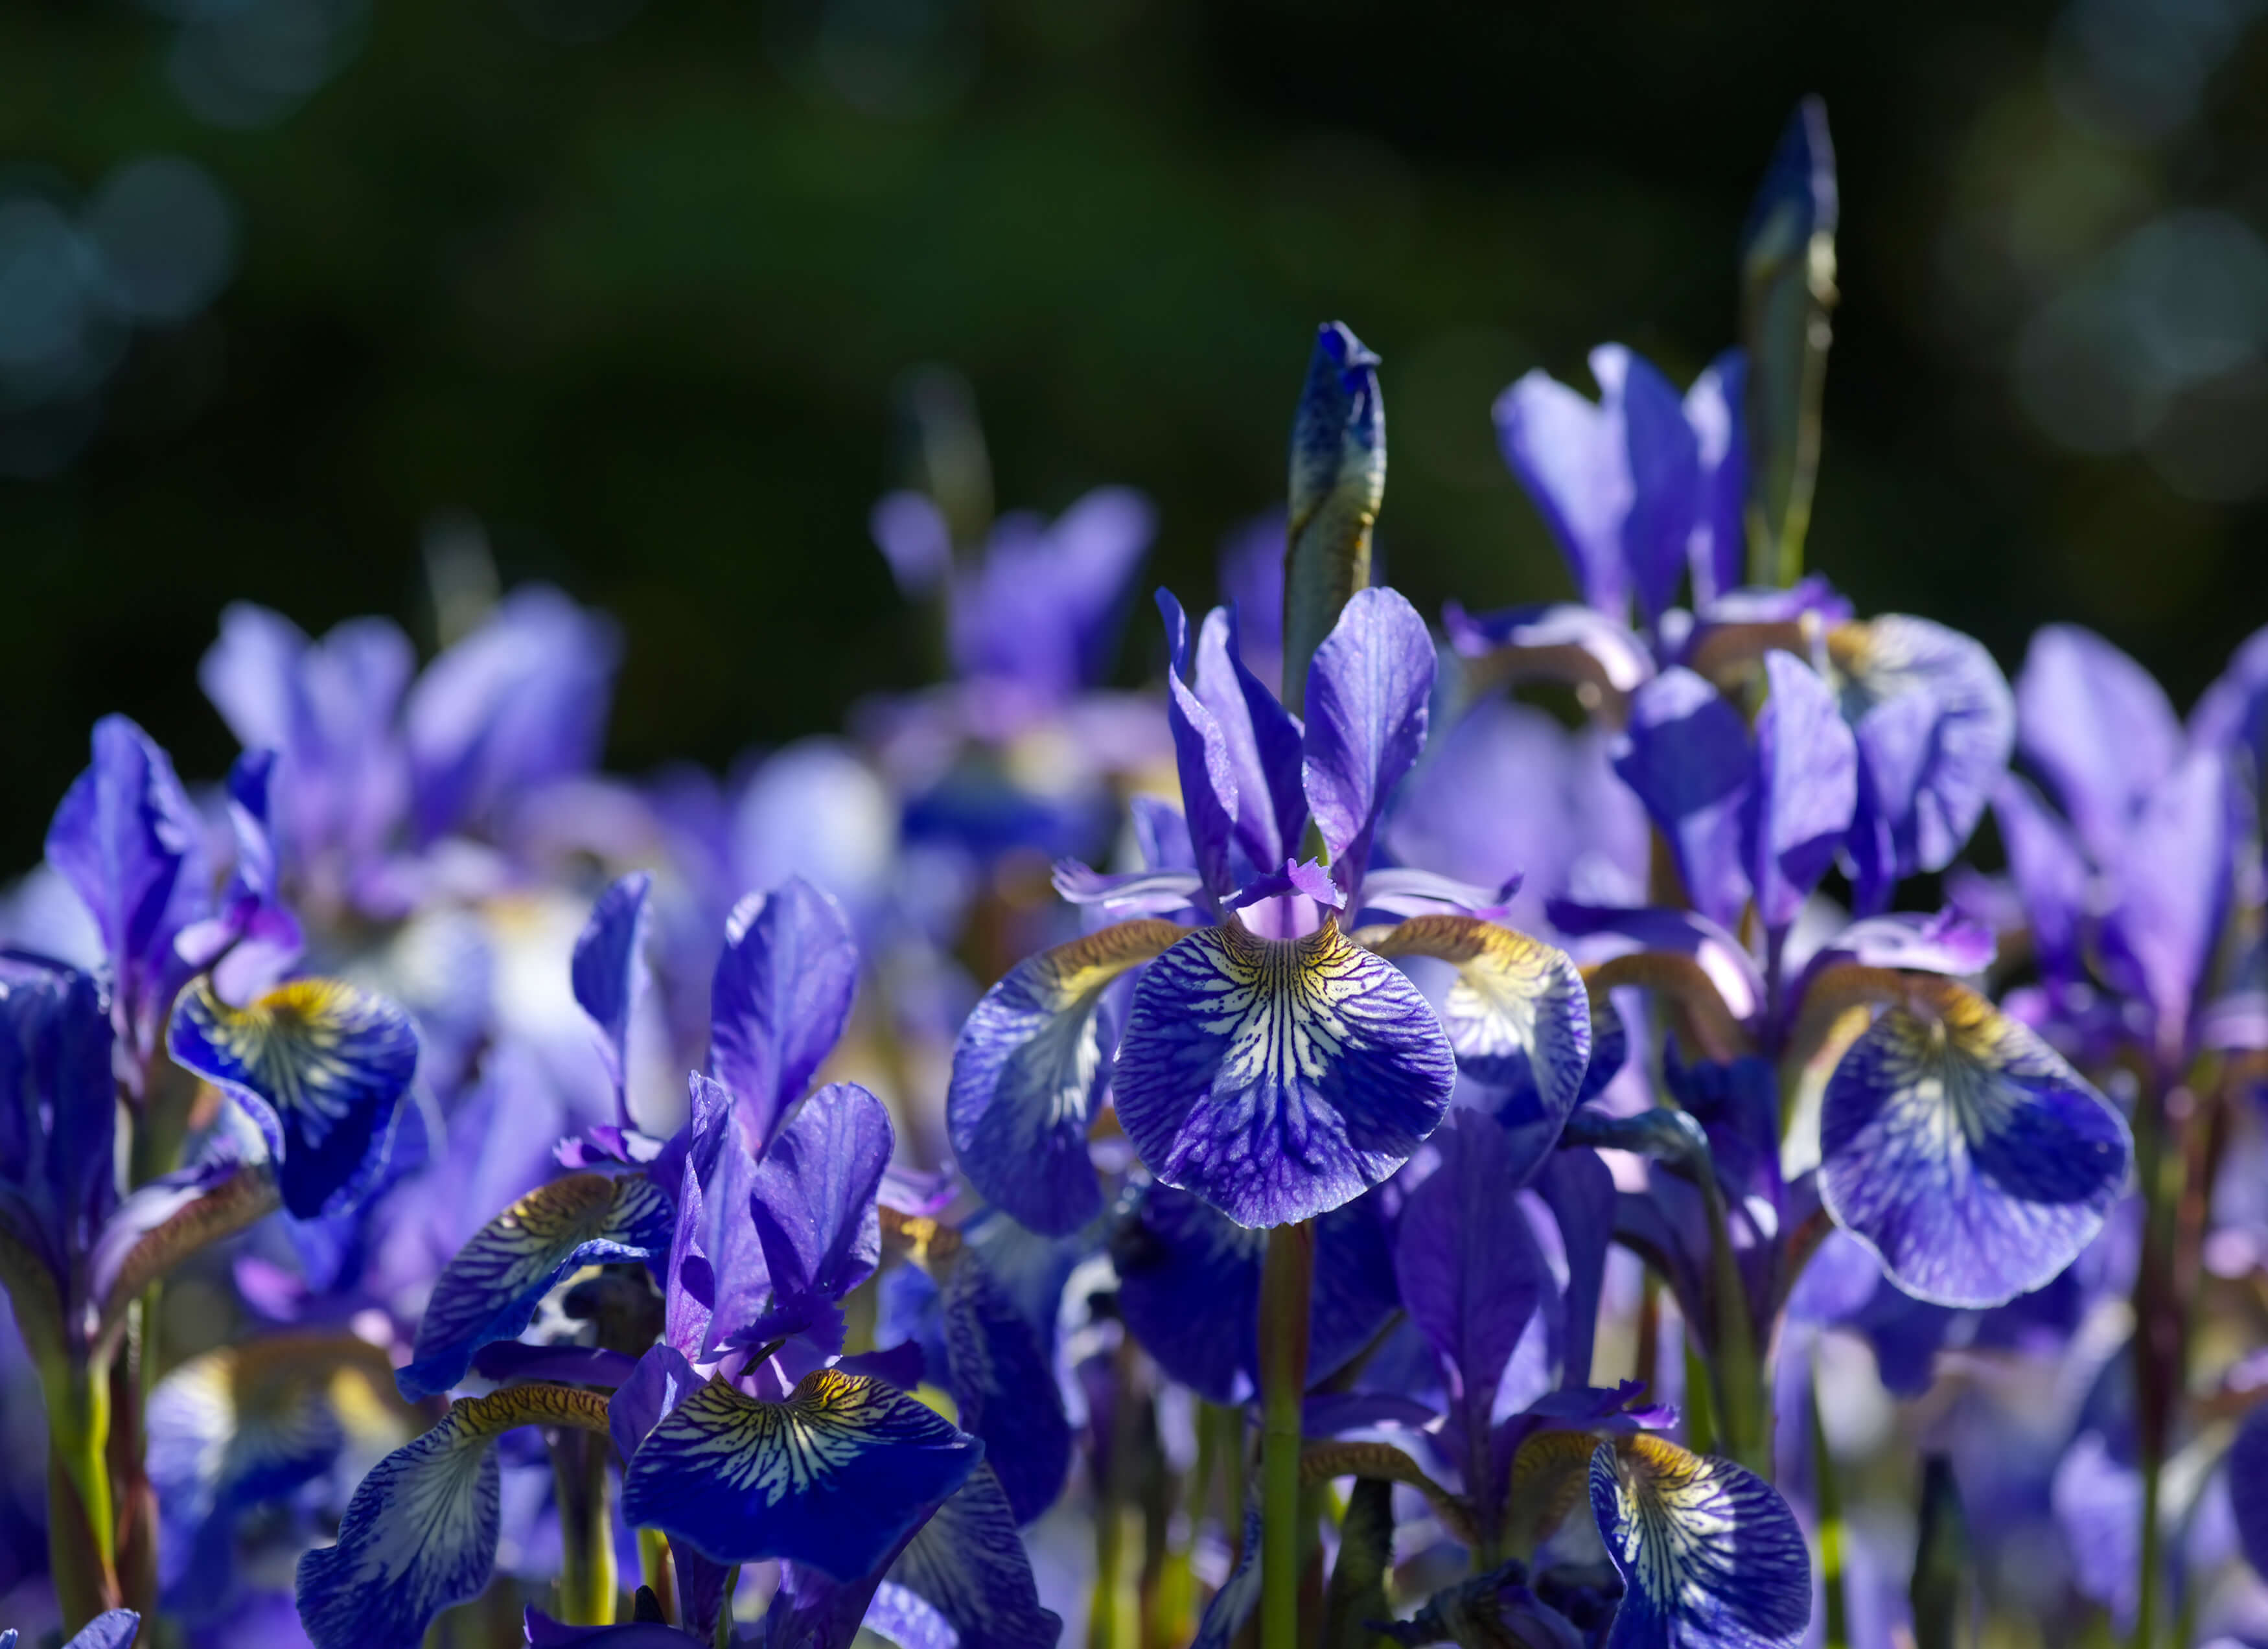 A group of purple irises blooming in spring